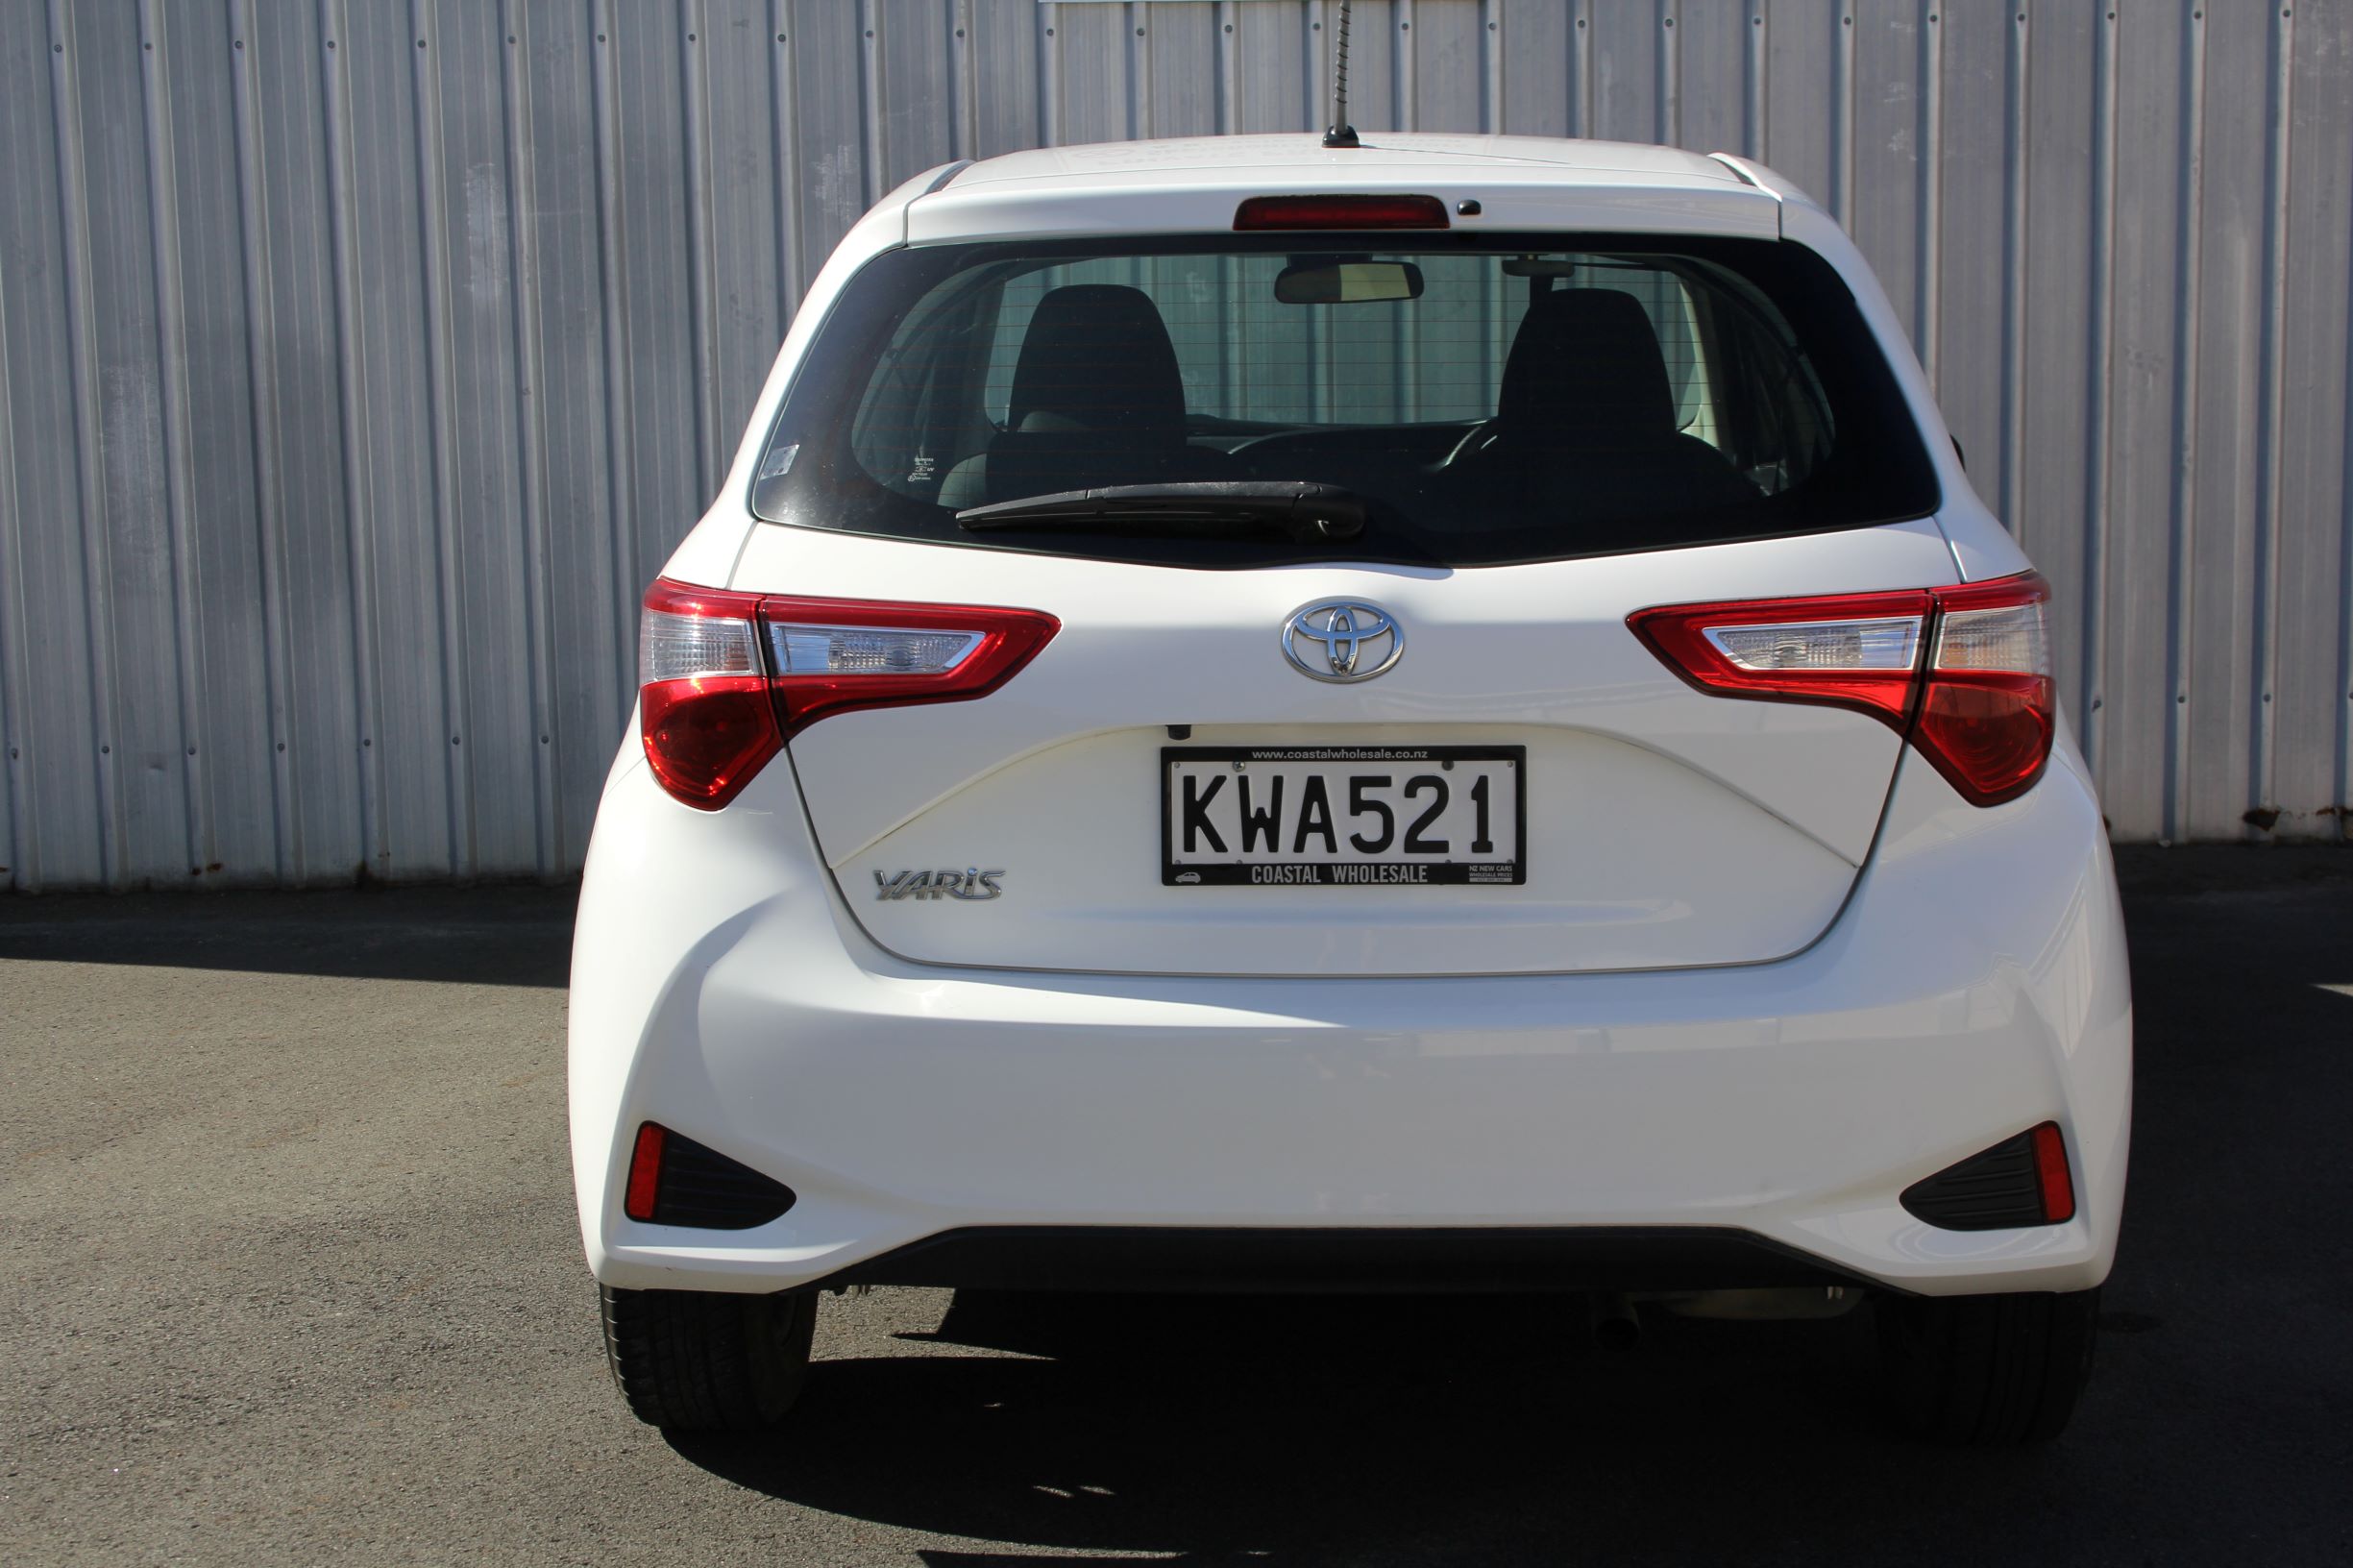 Toyota Yaris 2017 for sale in Auckland